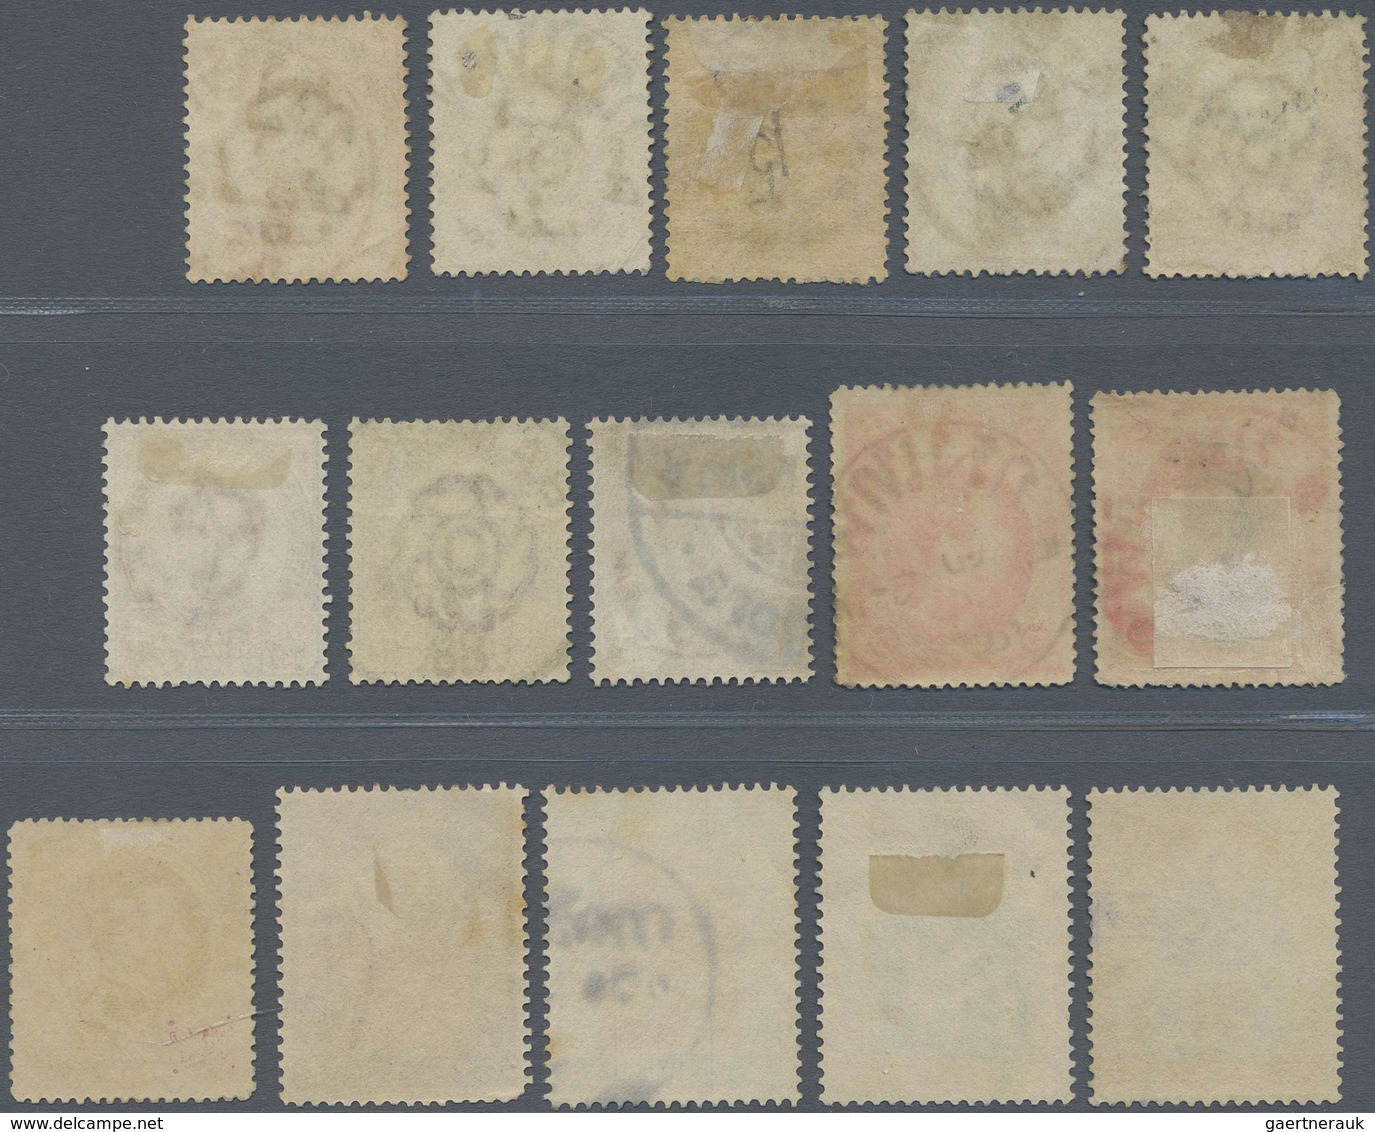 O Thailand: 1883-1910, 15 Classic Stamps With Unusual Cancellations Including Korat, Bangkok Paid, Coc - Thailand